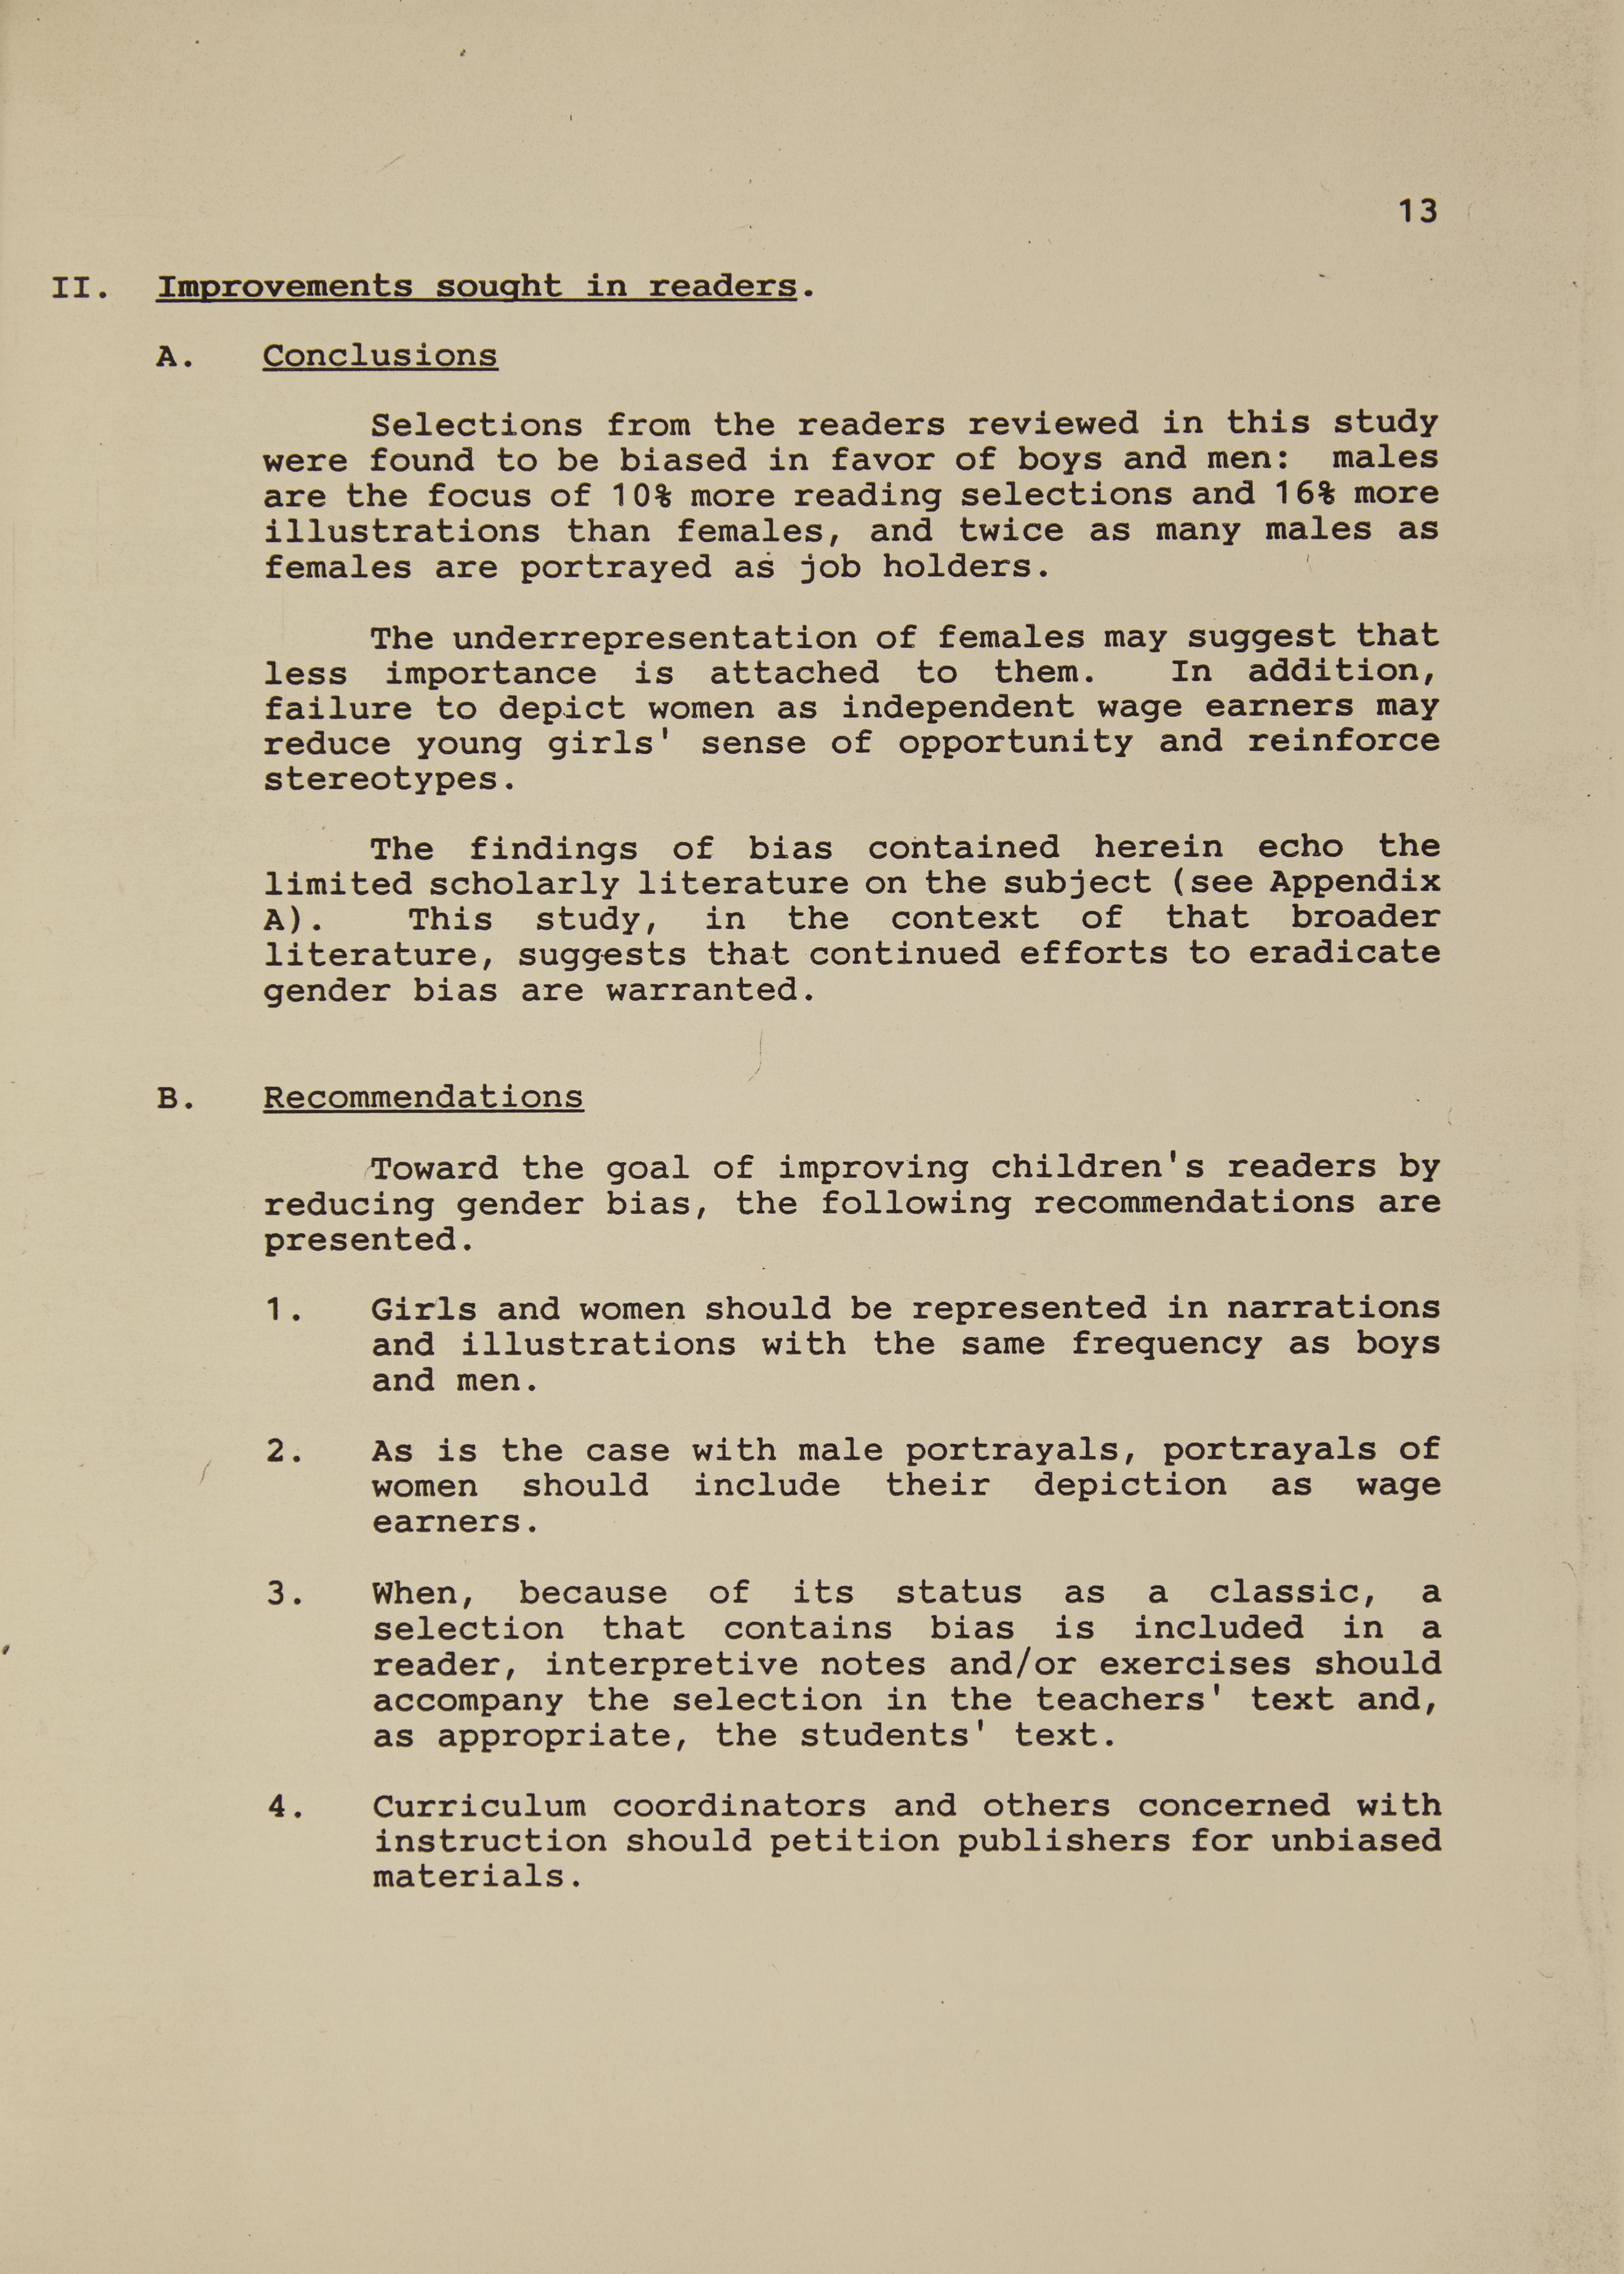  Single text page from the Comptroller's report in 1991 containing a summary of the conclusions and recommendations from the researchers.